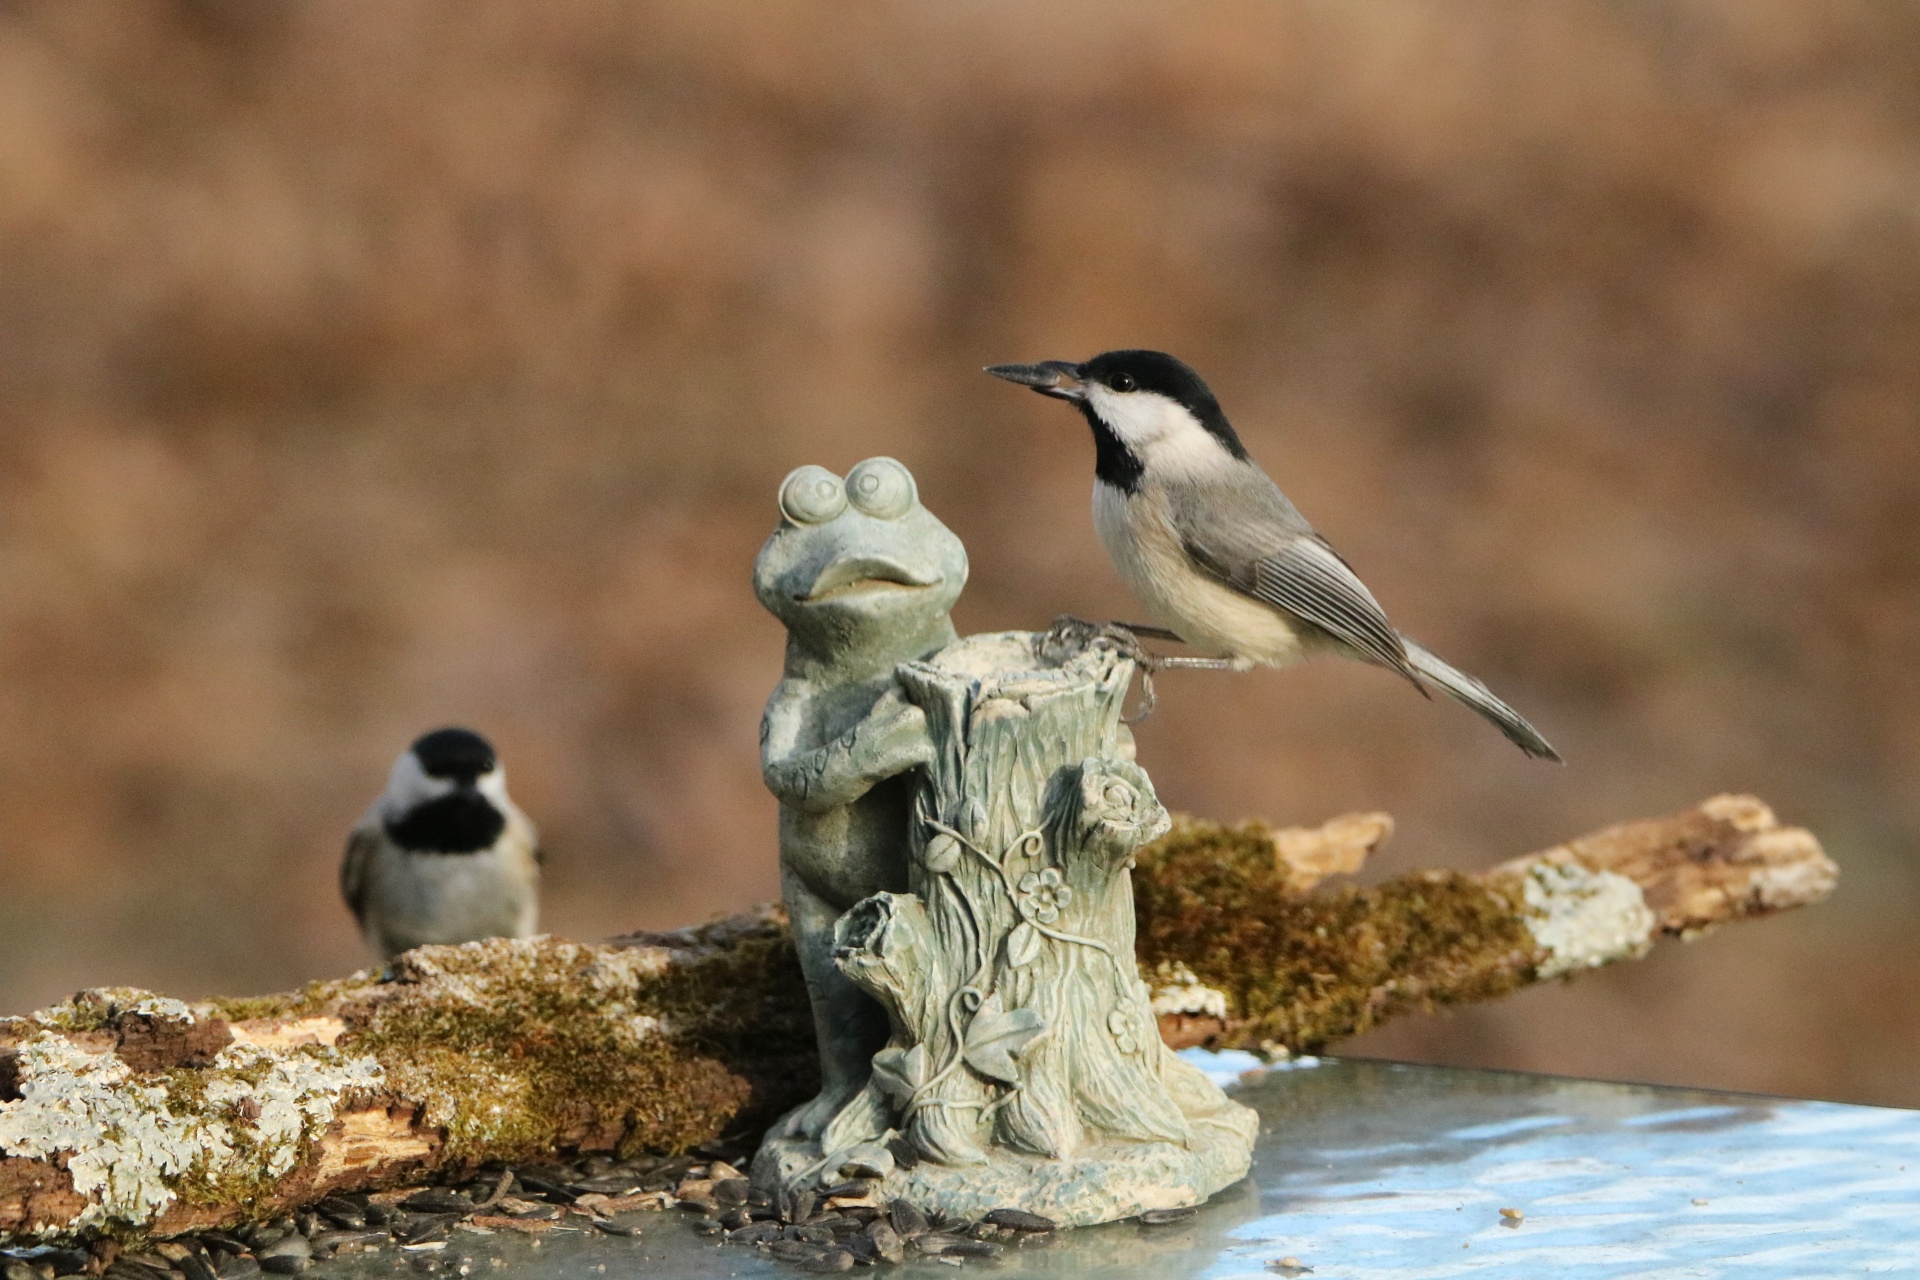 Two black-capped chickadees, one standing on a frog statue with a sunflower seed in its beak and another waiting in the background.